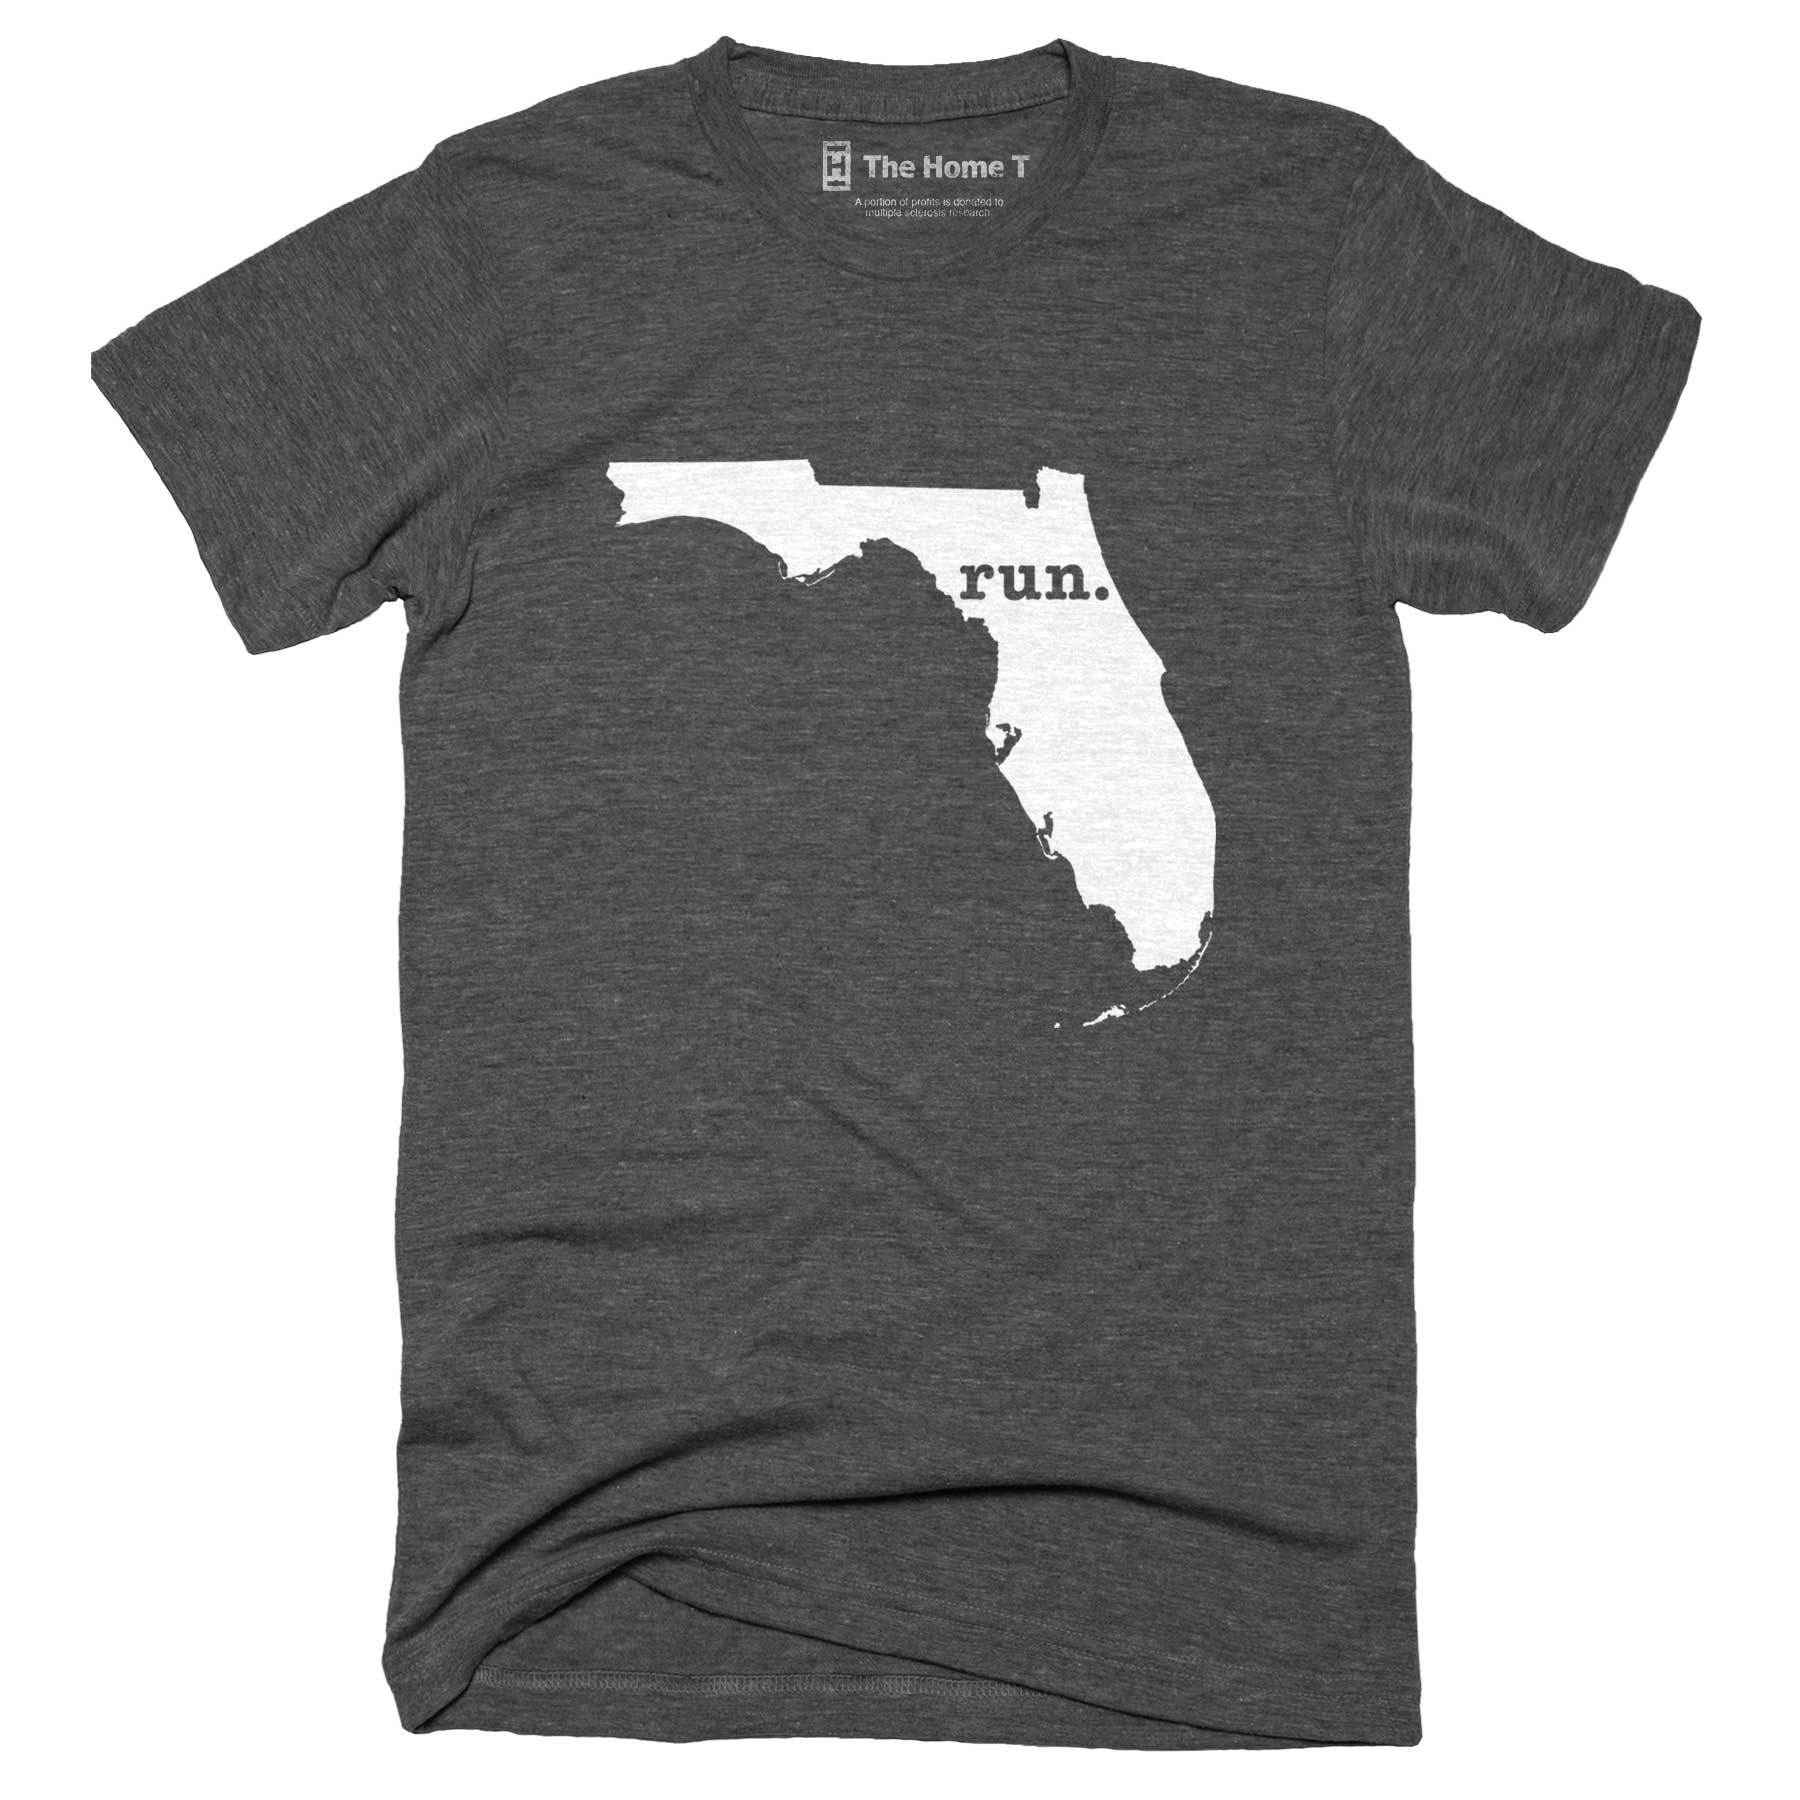 Florida Clothing and Apparel - The Home T